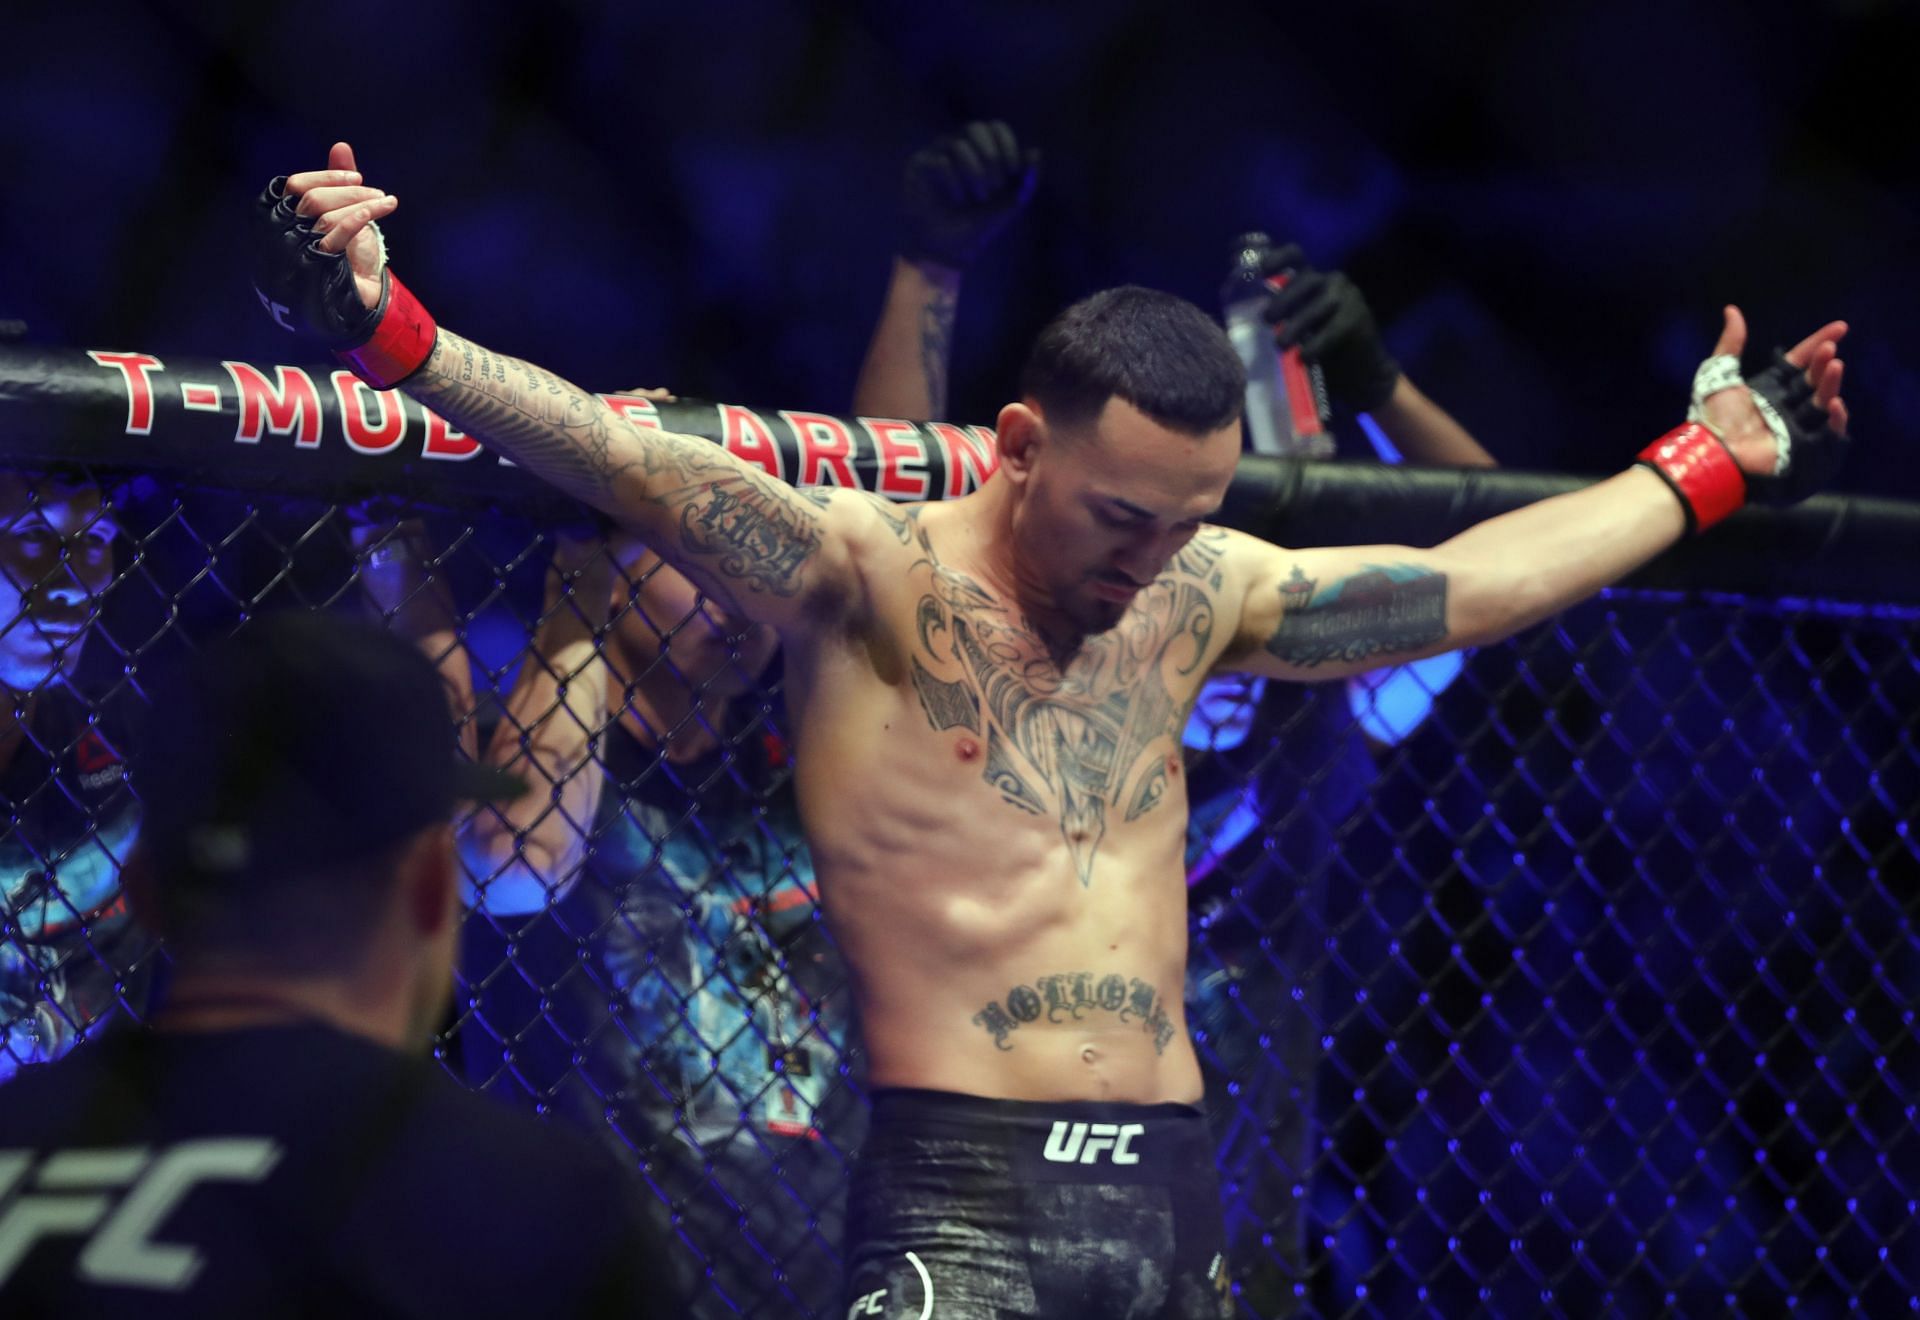 Should Max Holloway make the move to 155lbs in 2022?